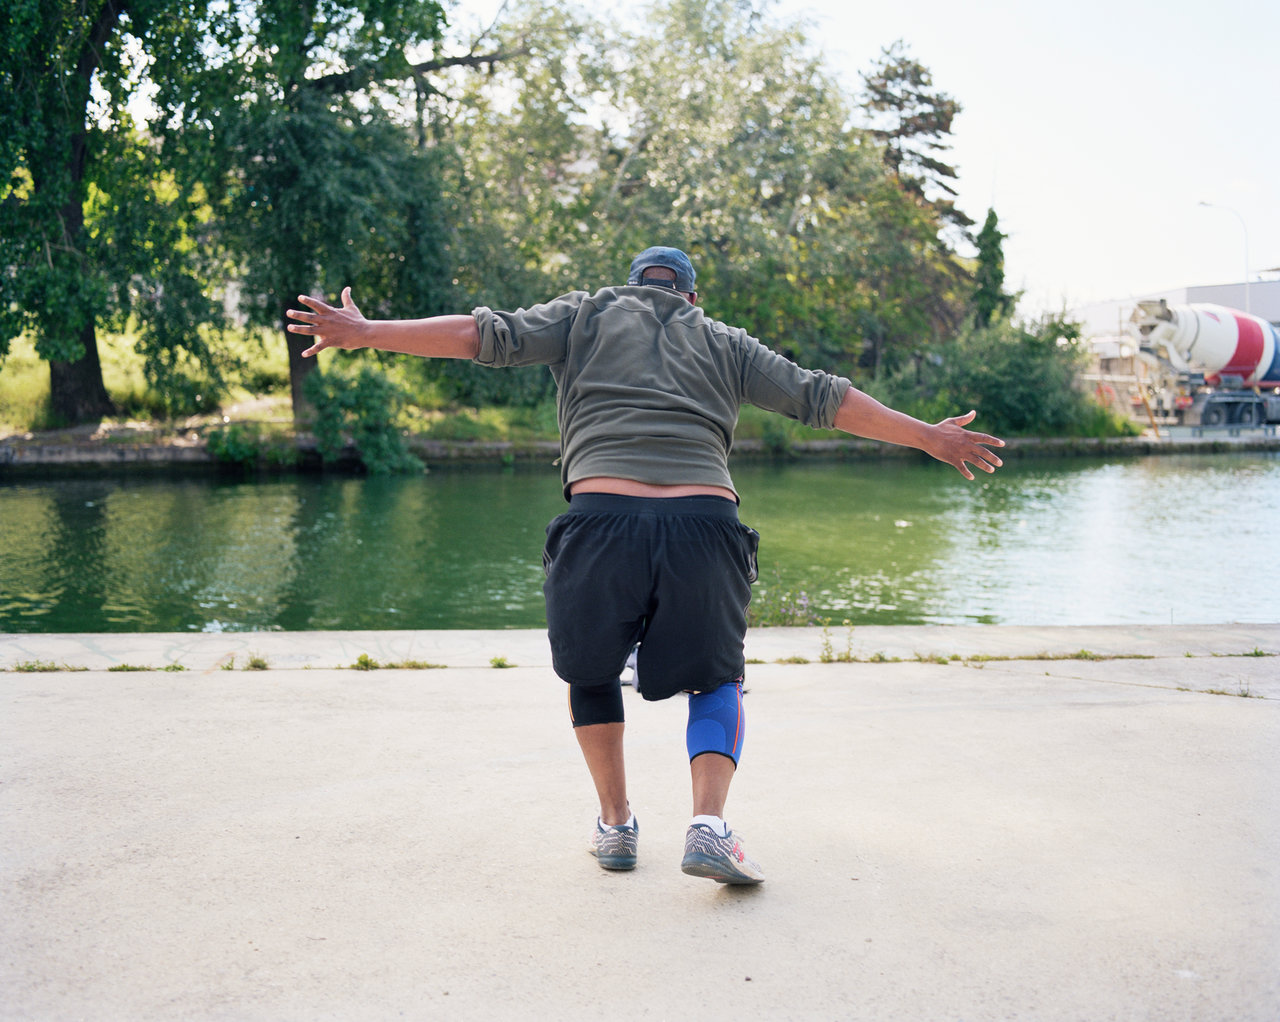 A man photographed from behind dances with open arms facing a canal in a Paris district